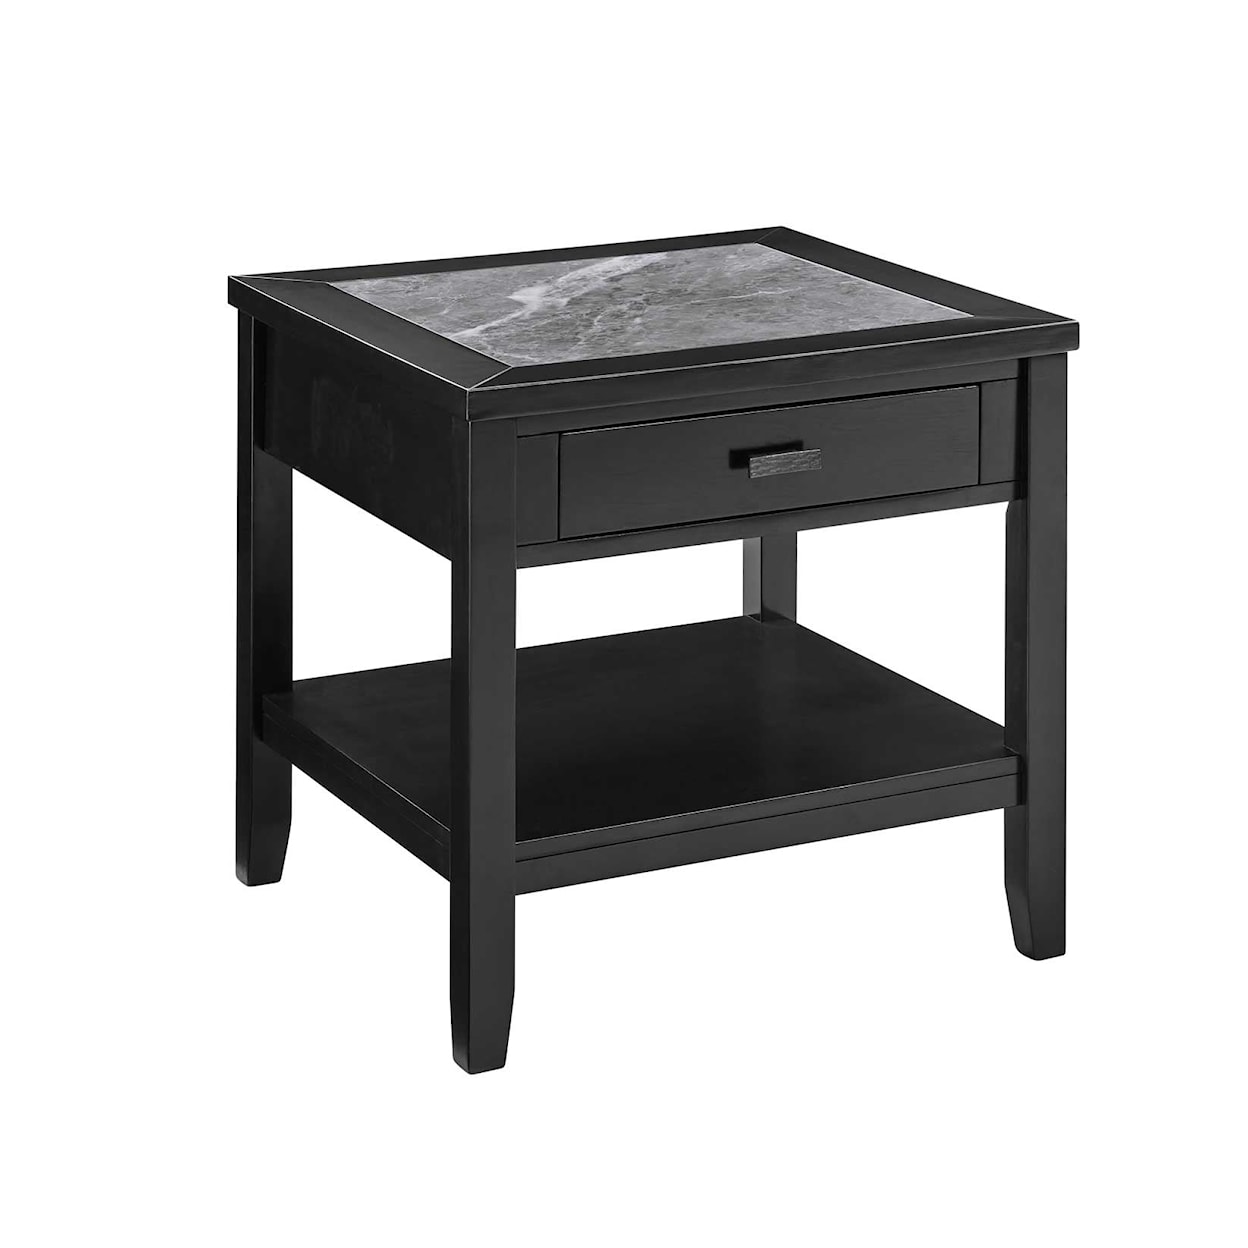 Prime Garvine End Table with Storage